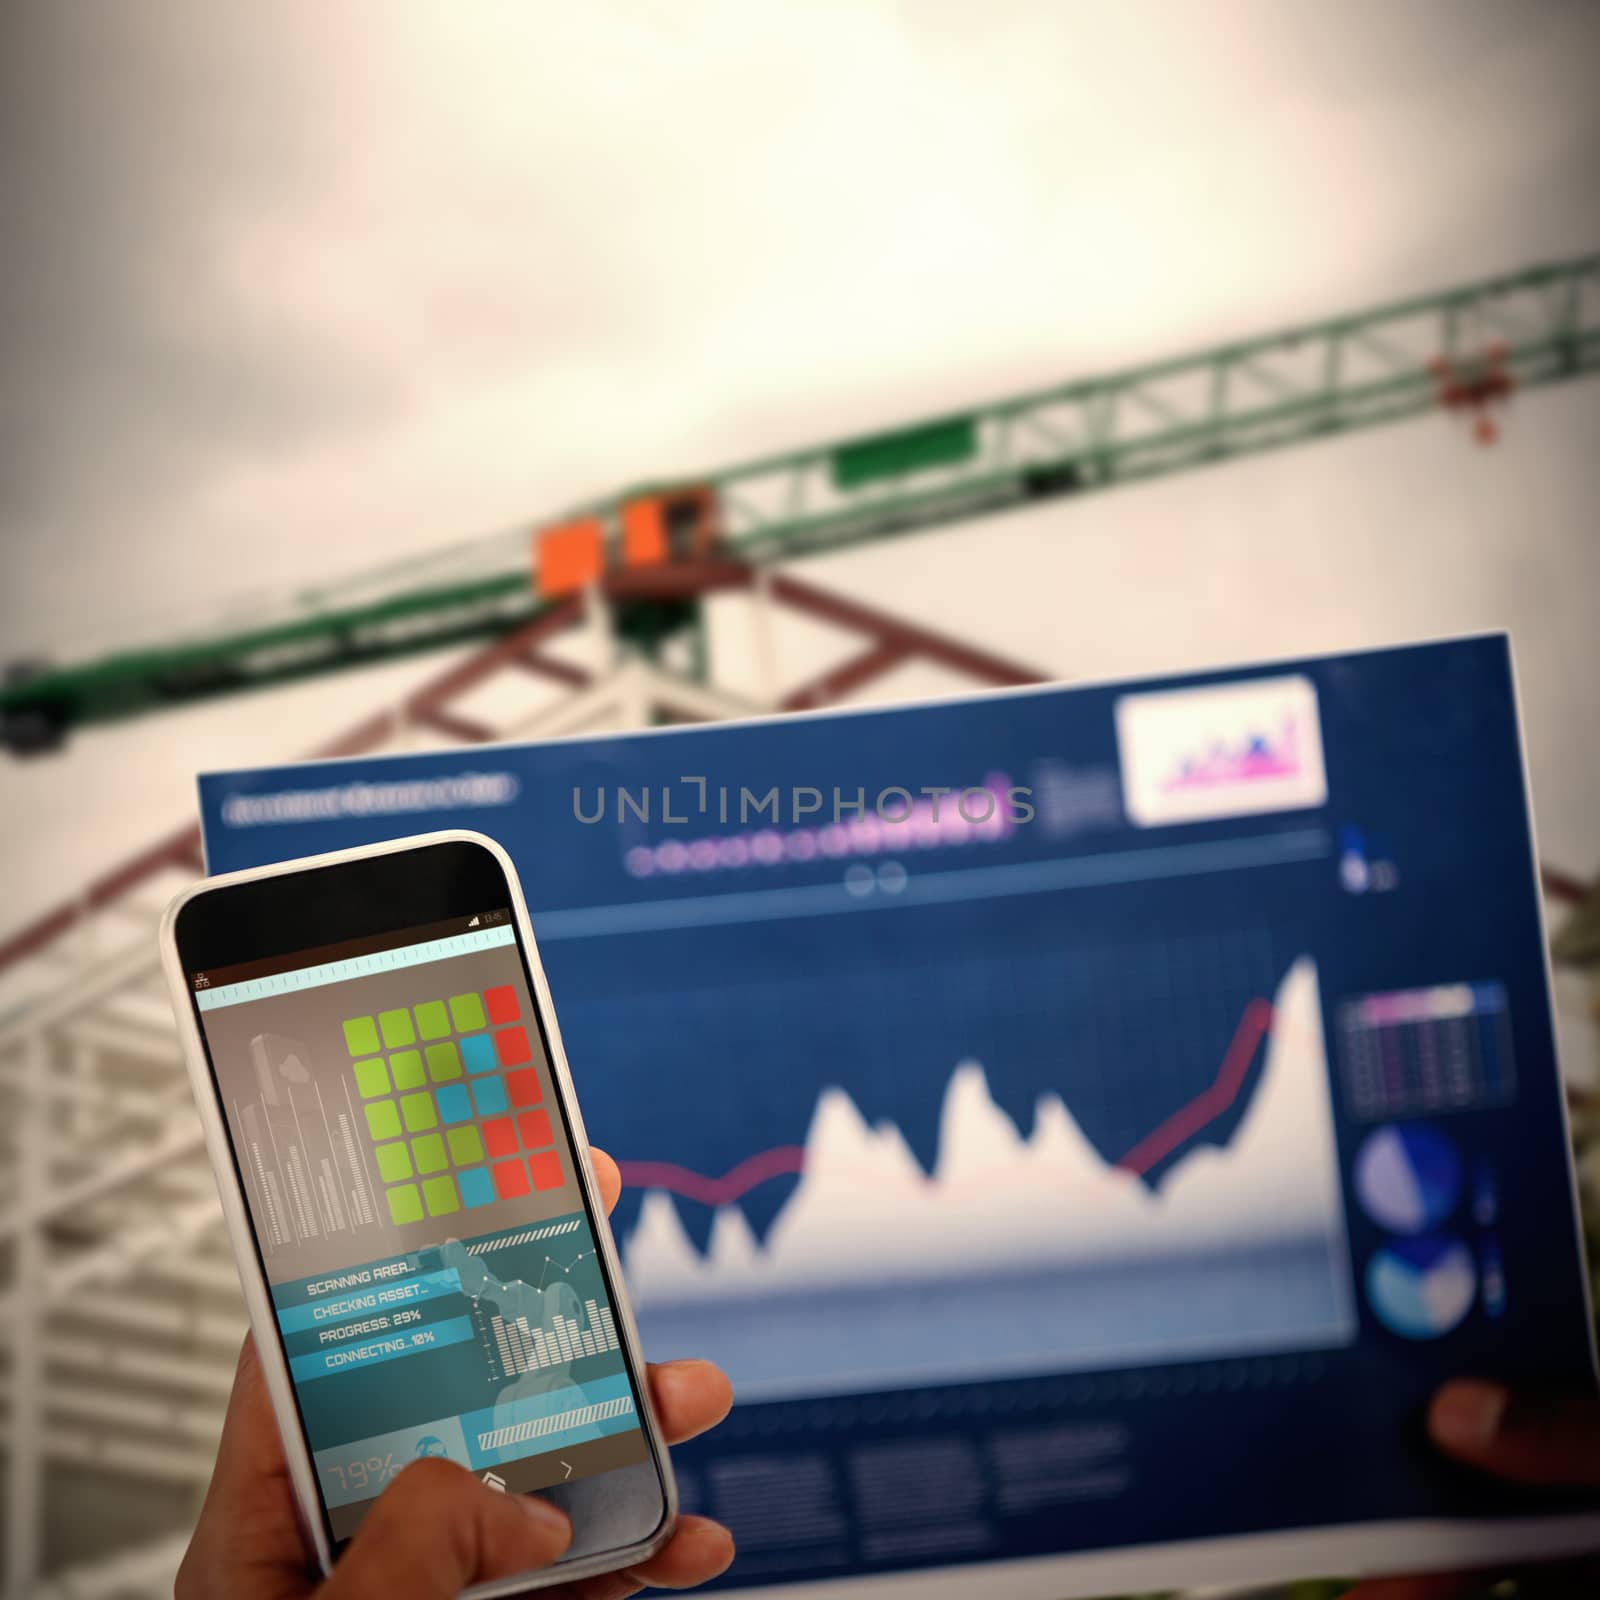 Cropped image of hand holding mobile phone and graph against 3d image of cranes at construction site